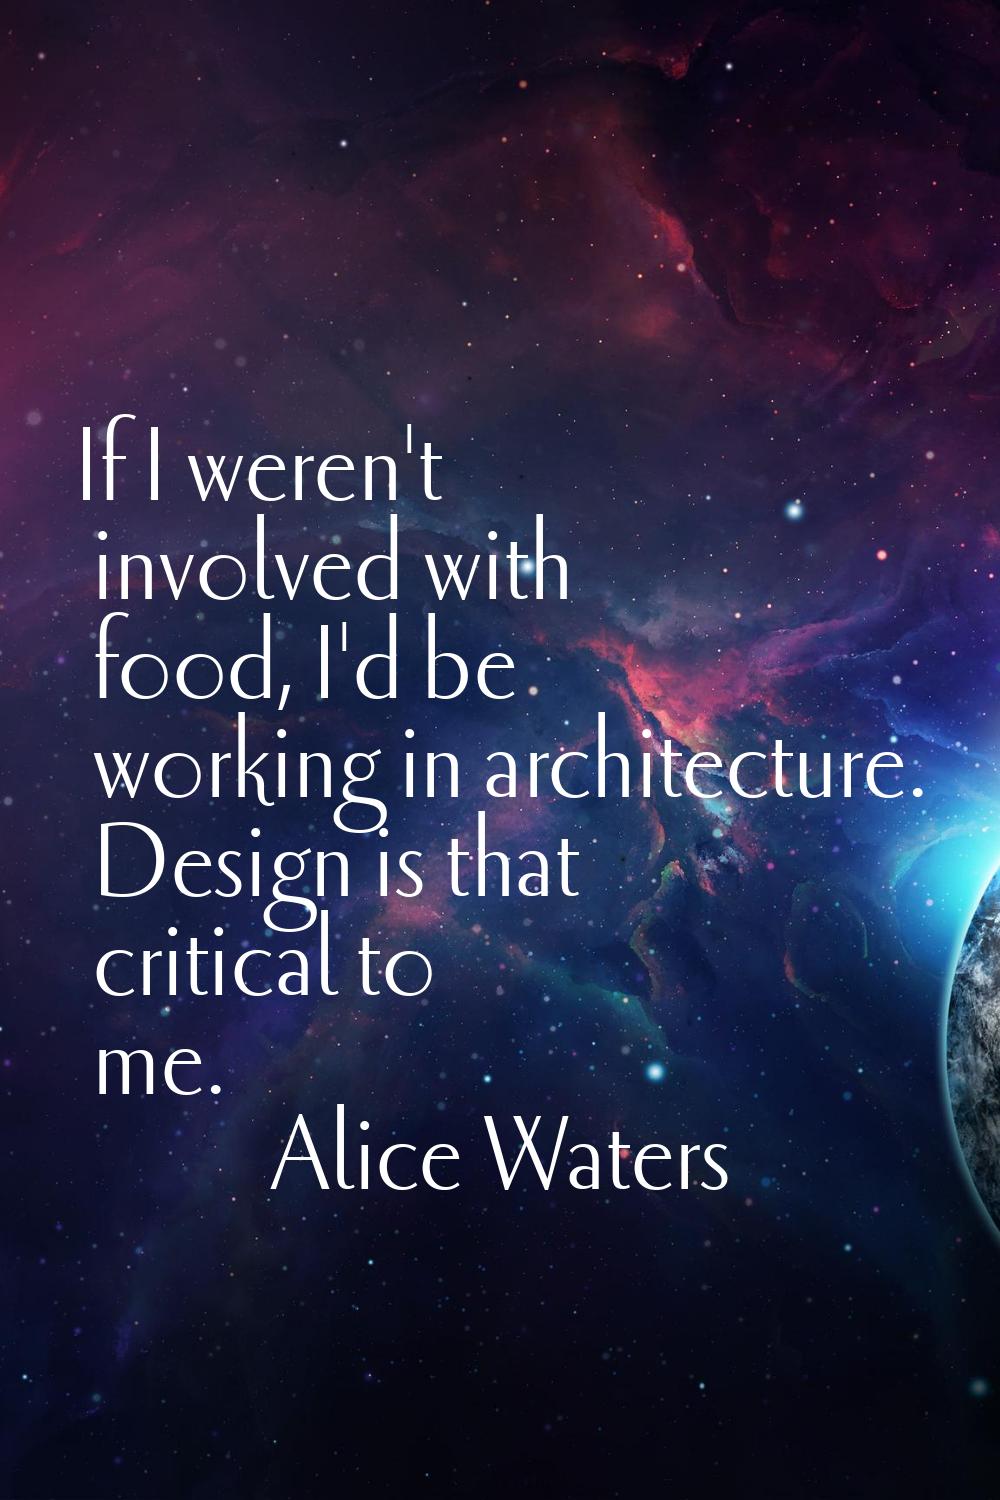 If I weren't involved with food, I'd be working in architecture. Design is that critical to me.